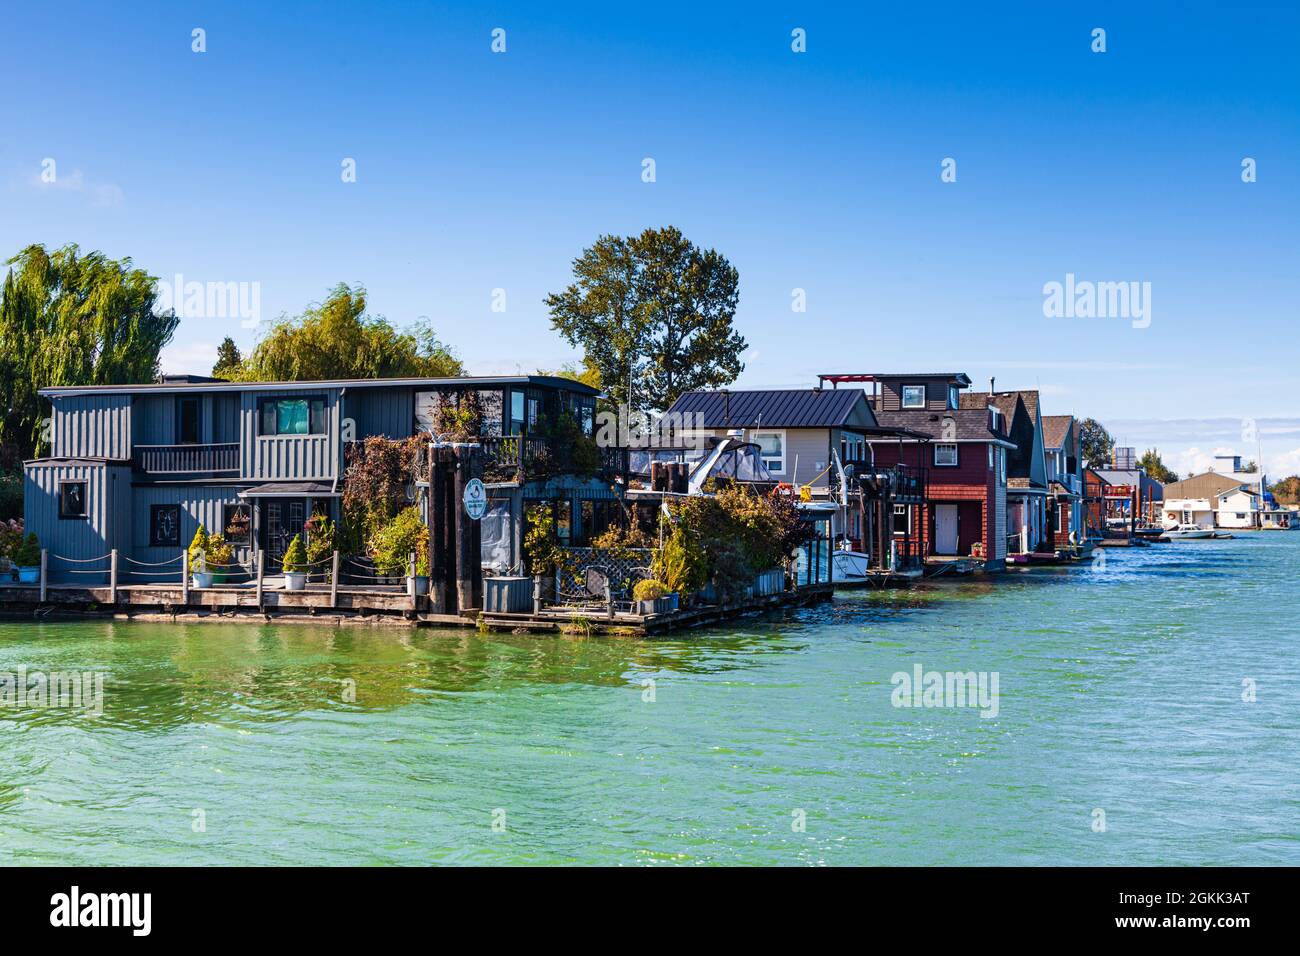 Floating homes along a channel of the Fraser River delta near Ladner British Columbia Canada Stock Photo